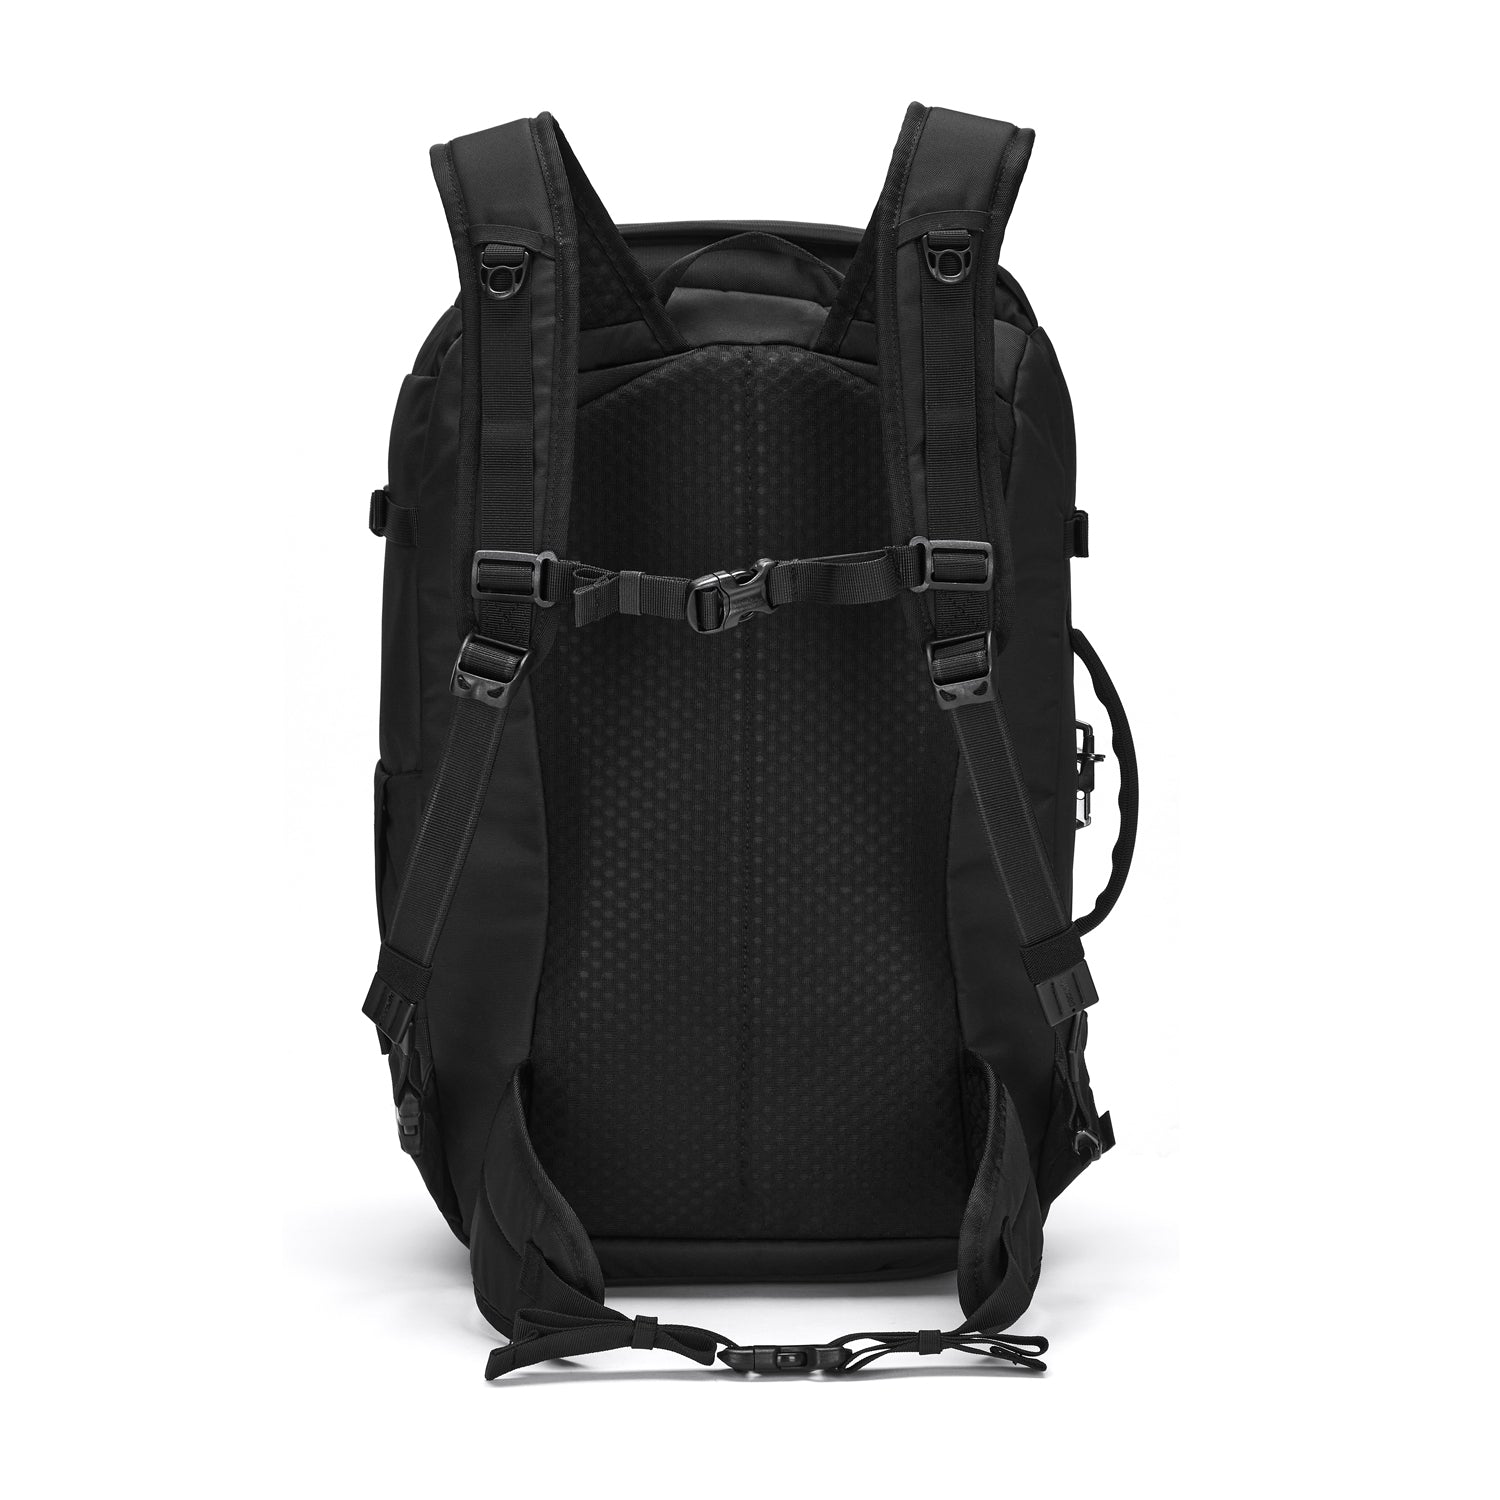 Vibe 40L Anti-Theft Carry-On Backpack